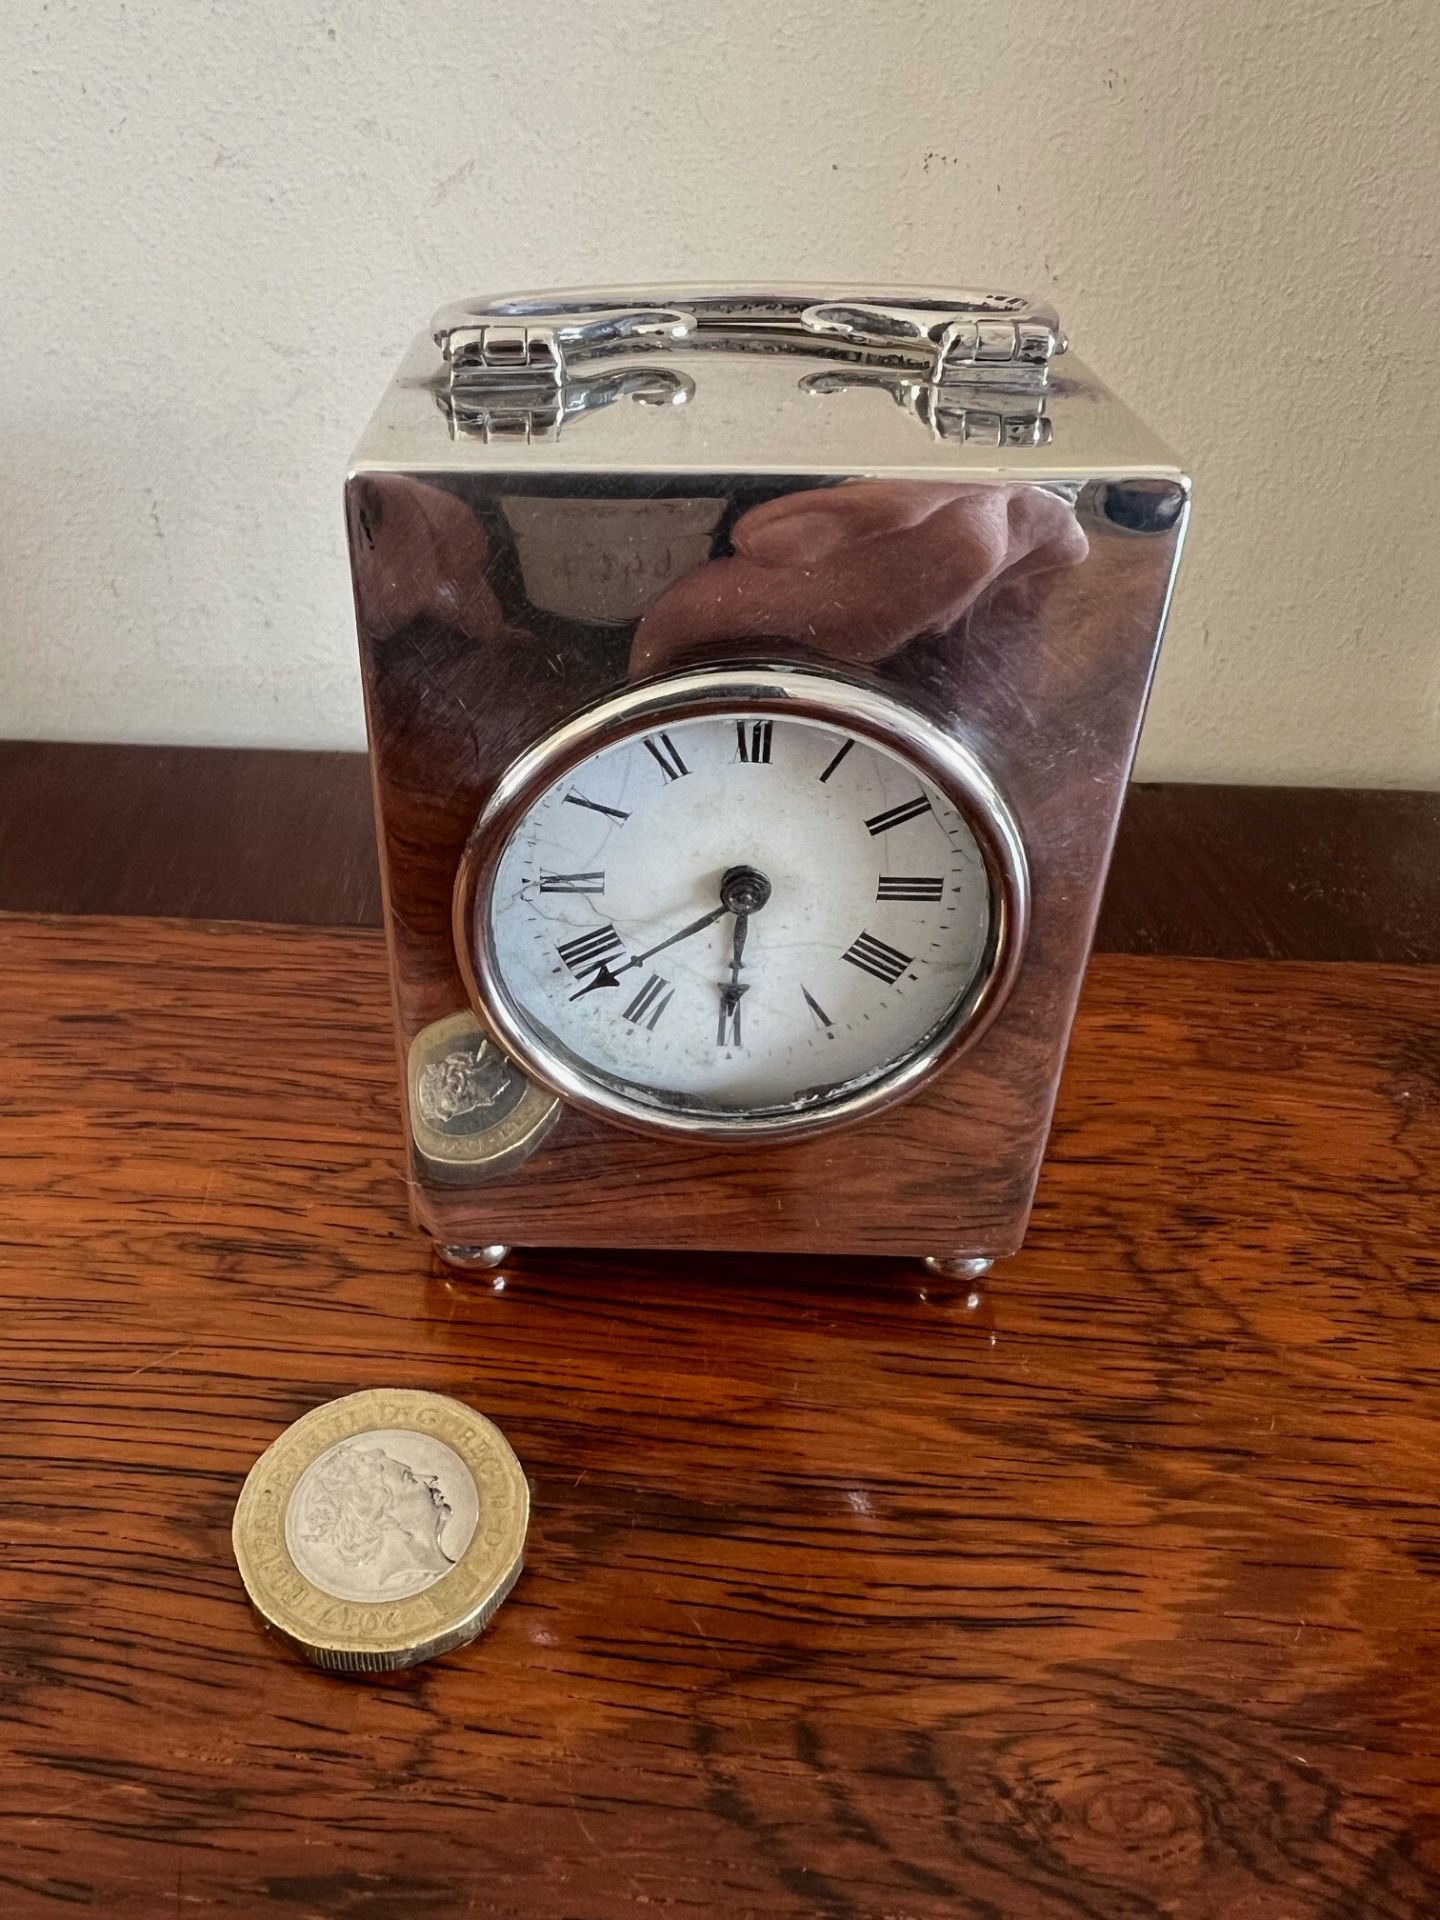 SILVER CASED CLOCK, FRENCH MOVEMENT, LONDON 1914, APPROX 7.5 x 5.5 x 4.25cm NOT WORKING, REPAIR TO - Image 2 of 6